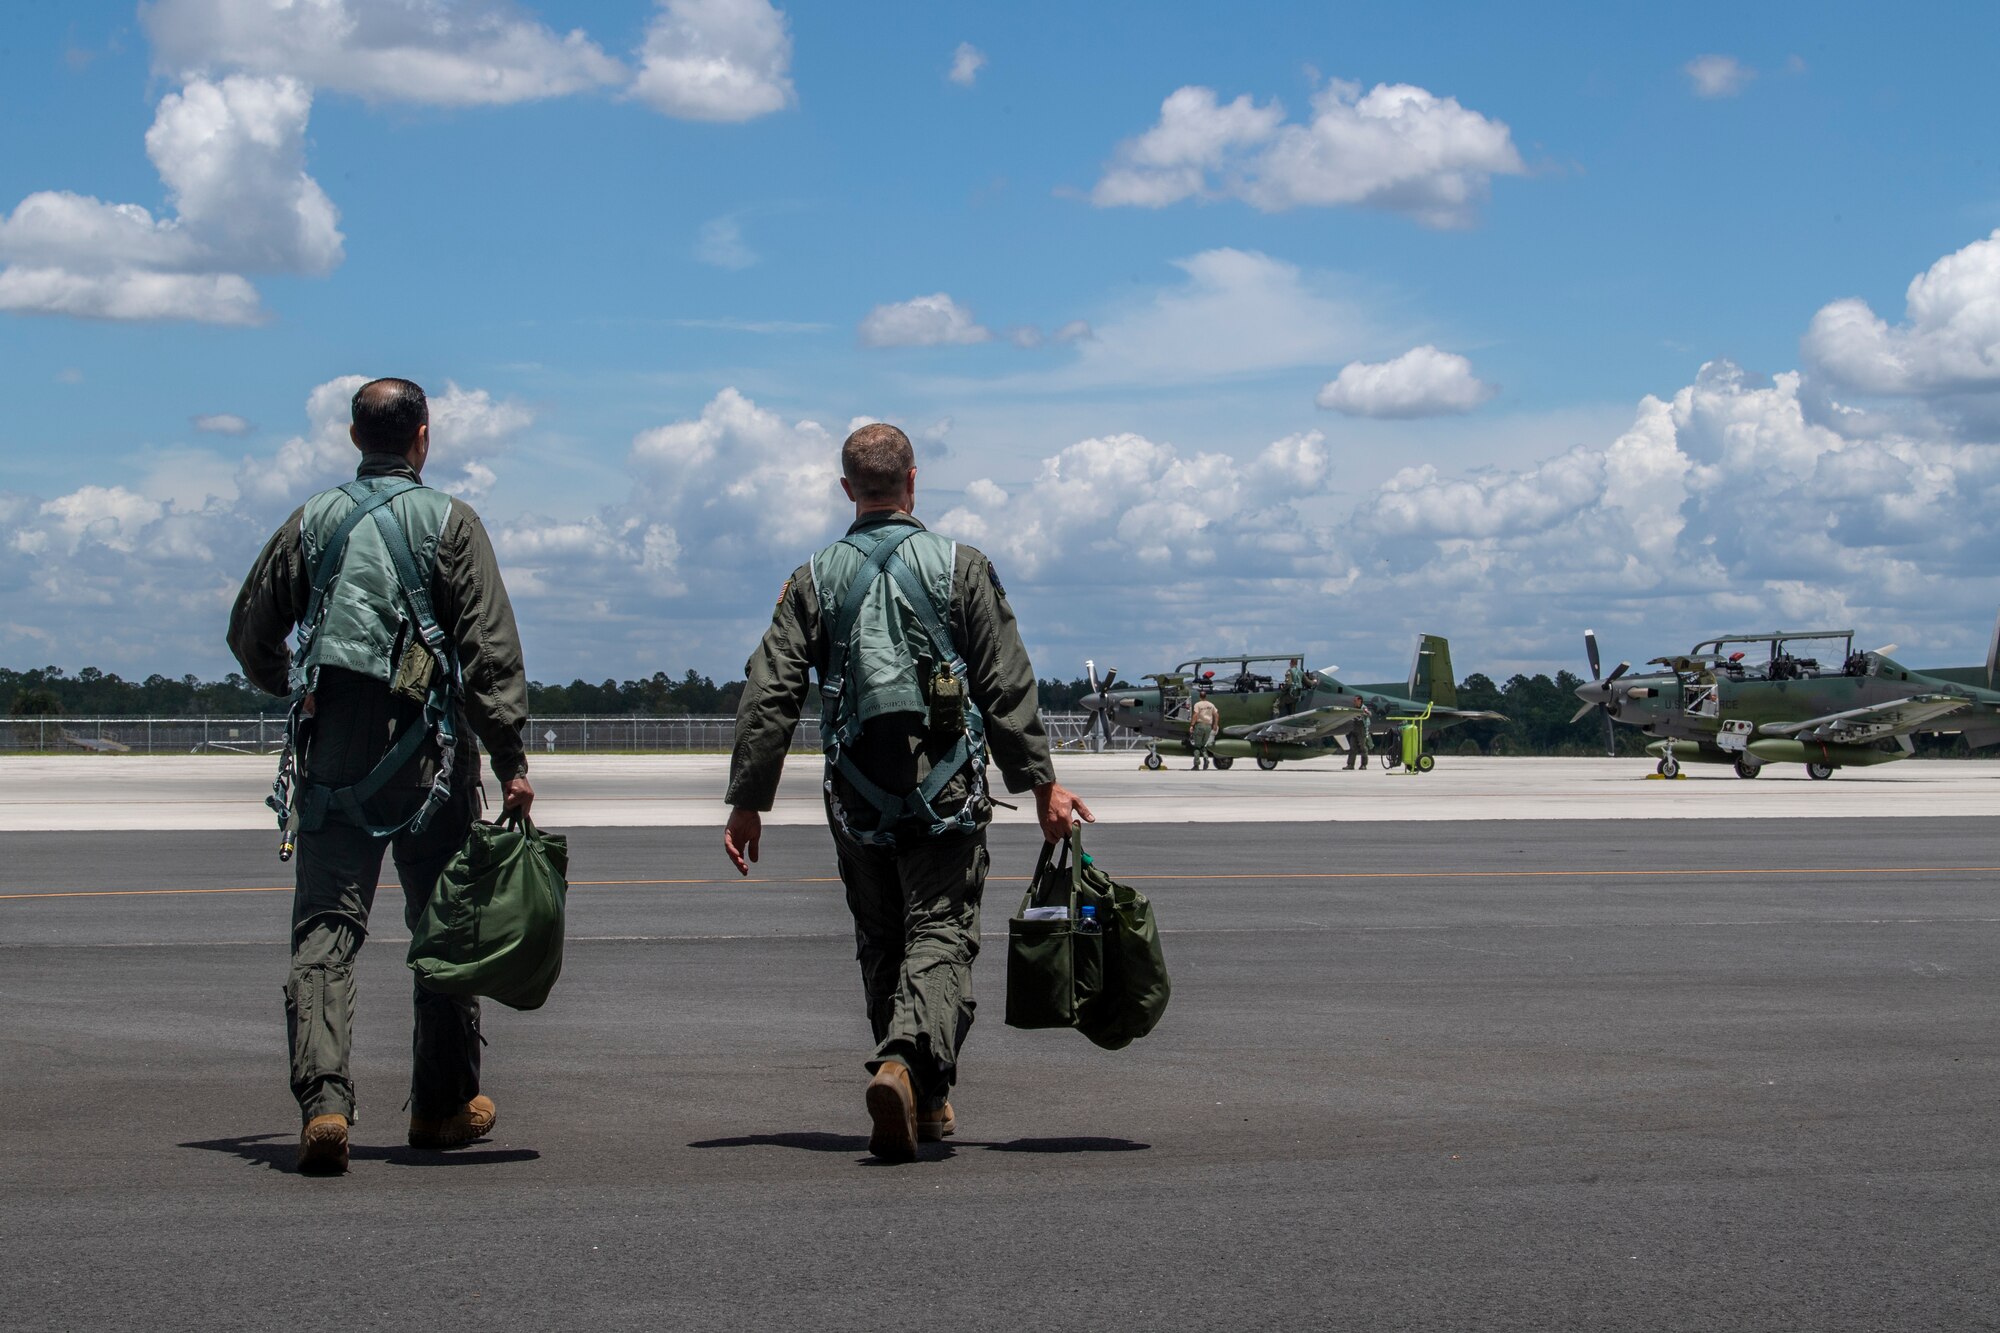 U.S. Air Force Lt. Col. Matthew Hall, AT-6E Wolverine instructor pilot, right, and Tunisian air force Capt. Jihed Makni, pilot, walk to an AT-6E at Avon Park Air Force Range, Florida, May 12, 2022. The U.S. Air Force partnered with Colombia, Tunisia, Nigeria, and Thailand to co-develop tactics, techniques and procedures to combat violent extremist organizations while demonstrating the capabilities of the Airborne Extensible Relay Over-Horizon Network. (U.S. Air Force photo by Airman 1st Class Deanna Muir)